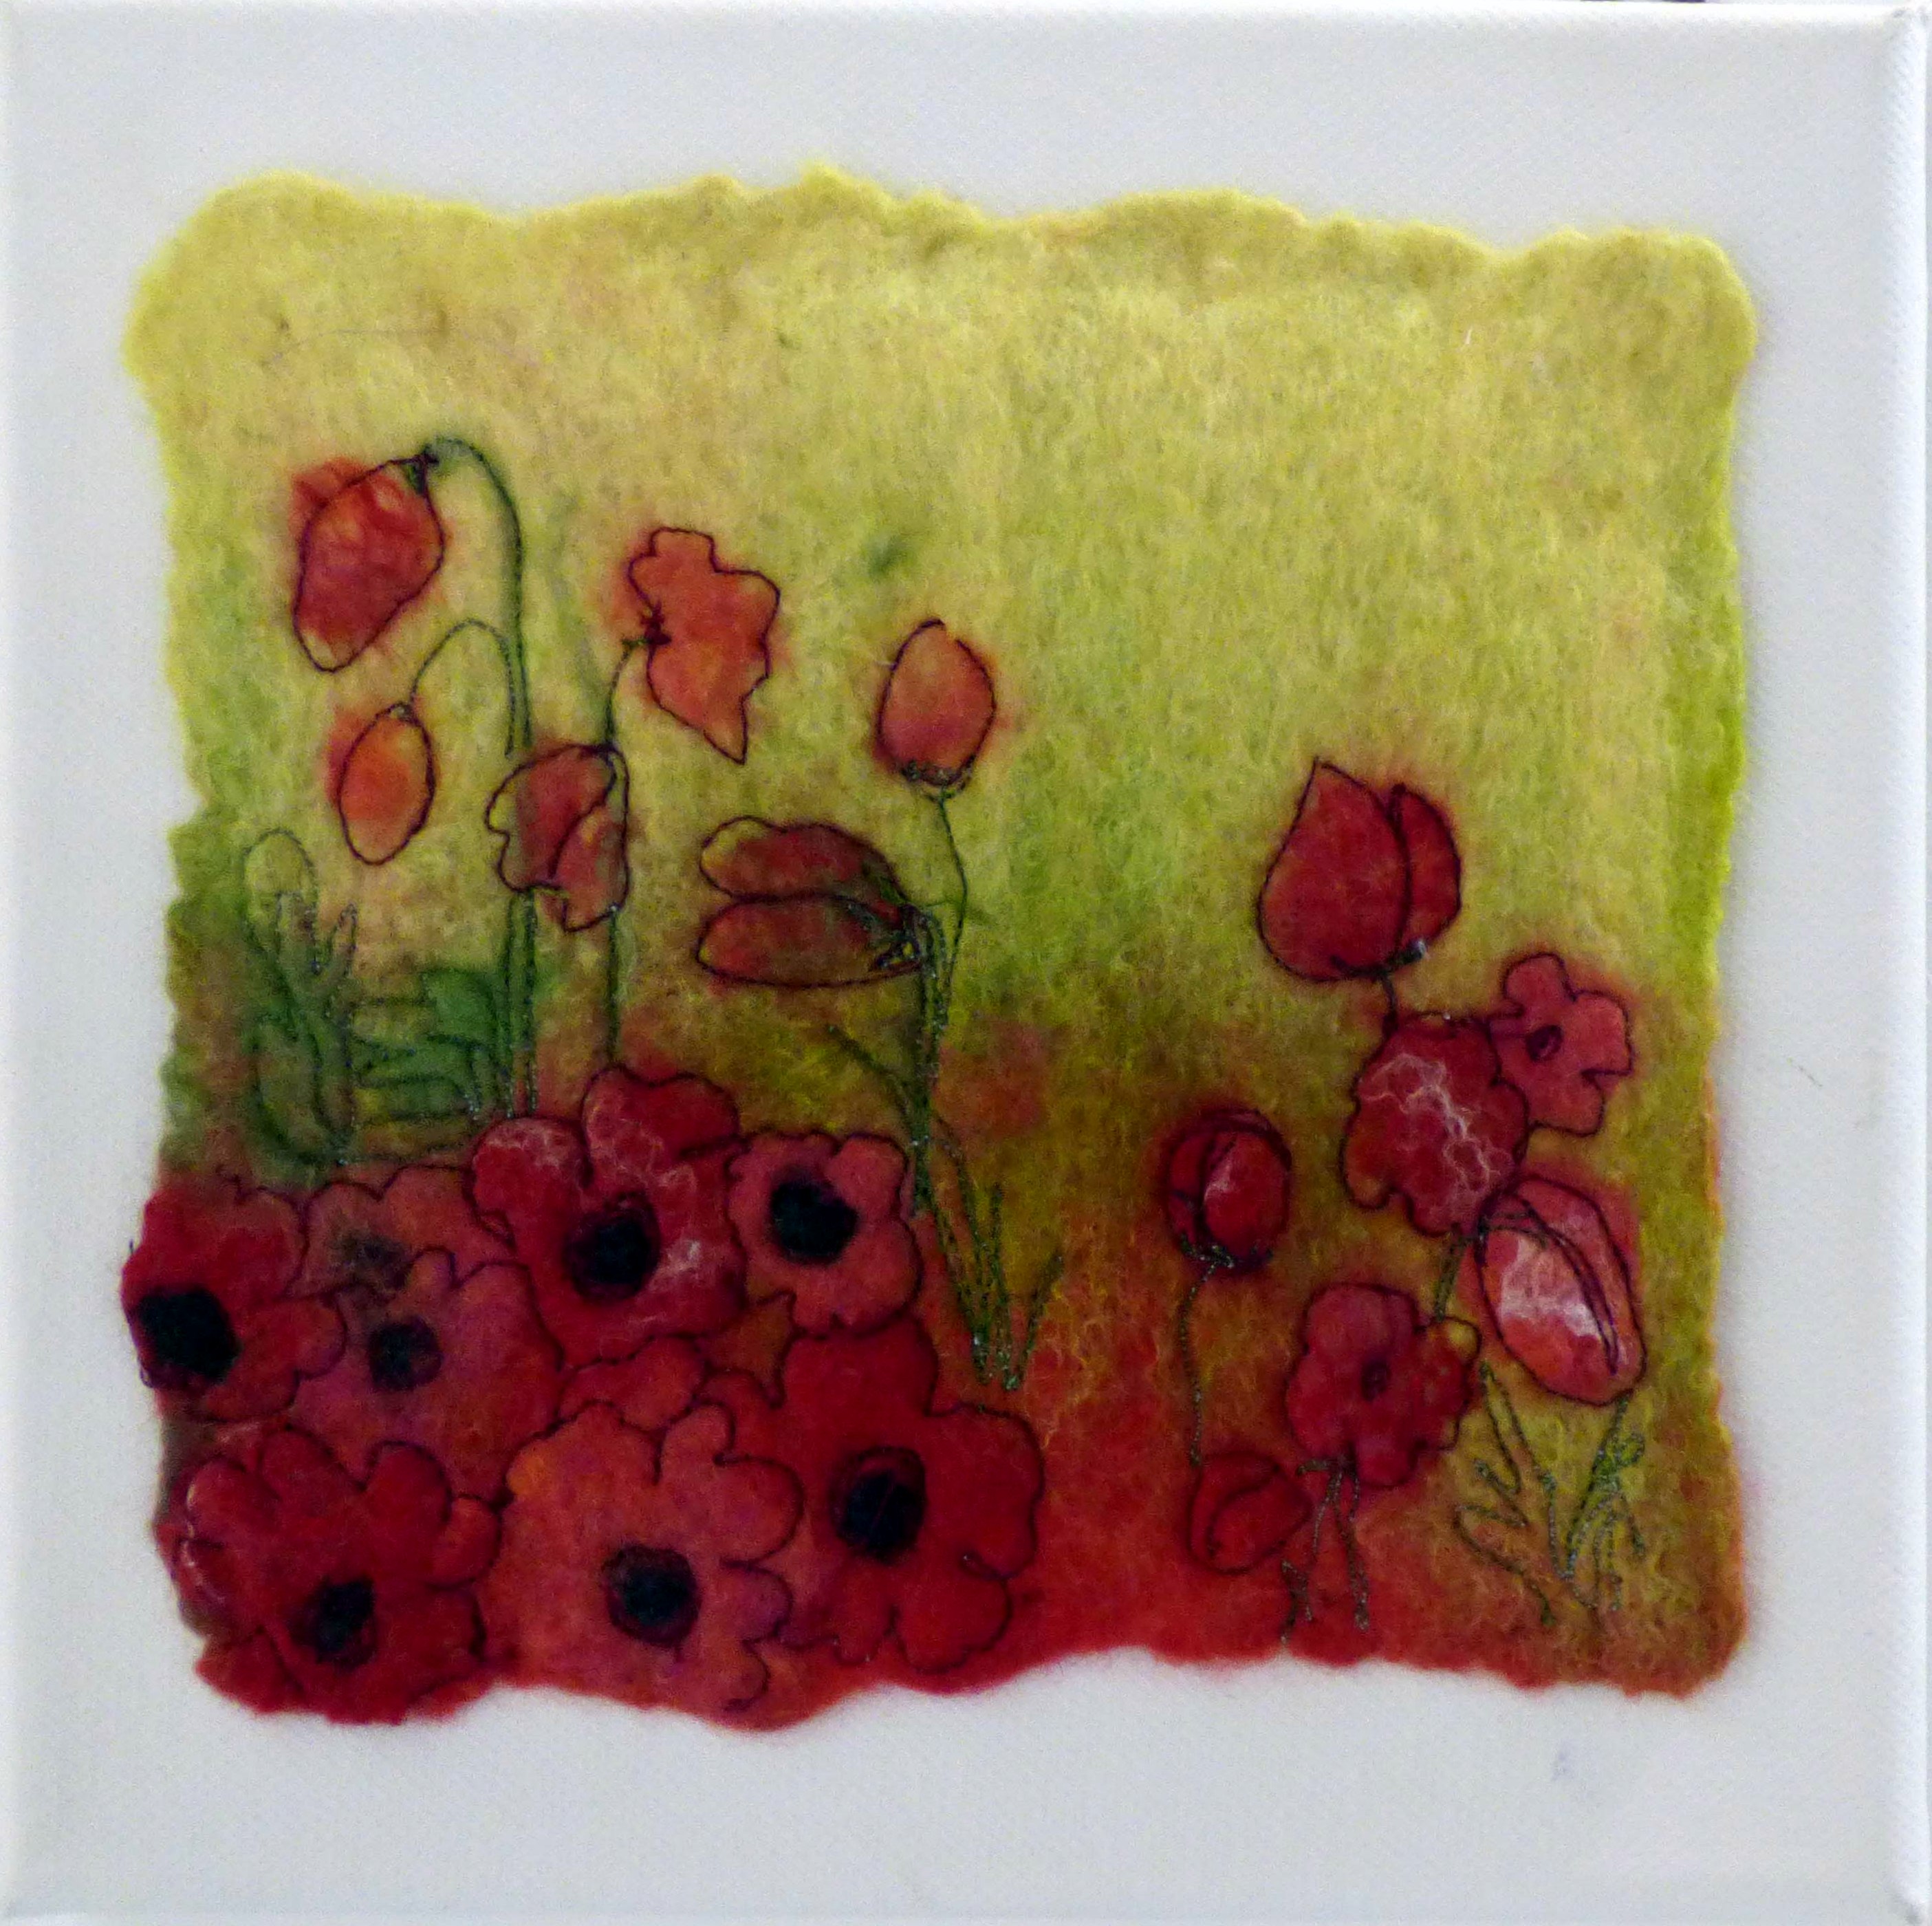 POPPIES by Pat Bean, Natural Progression Group, July 2021